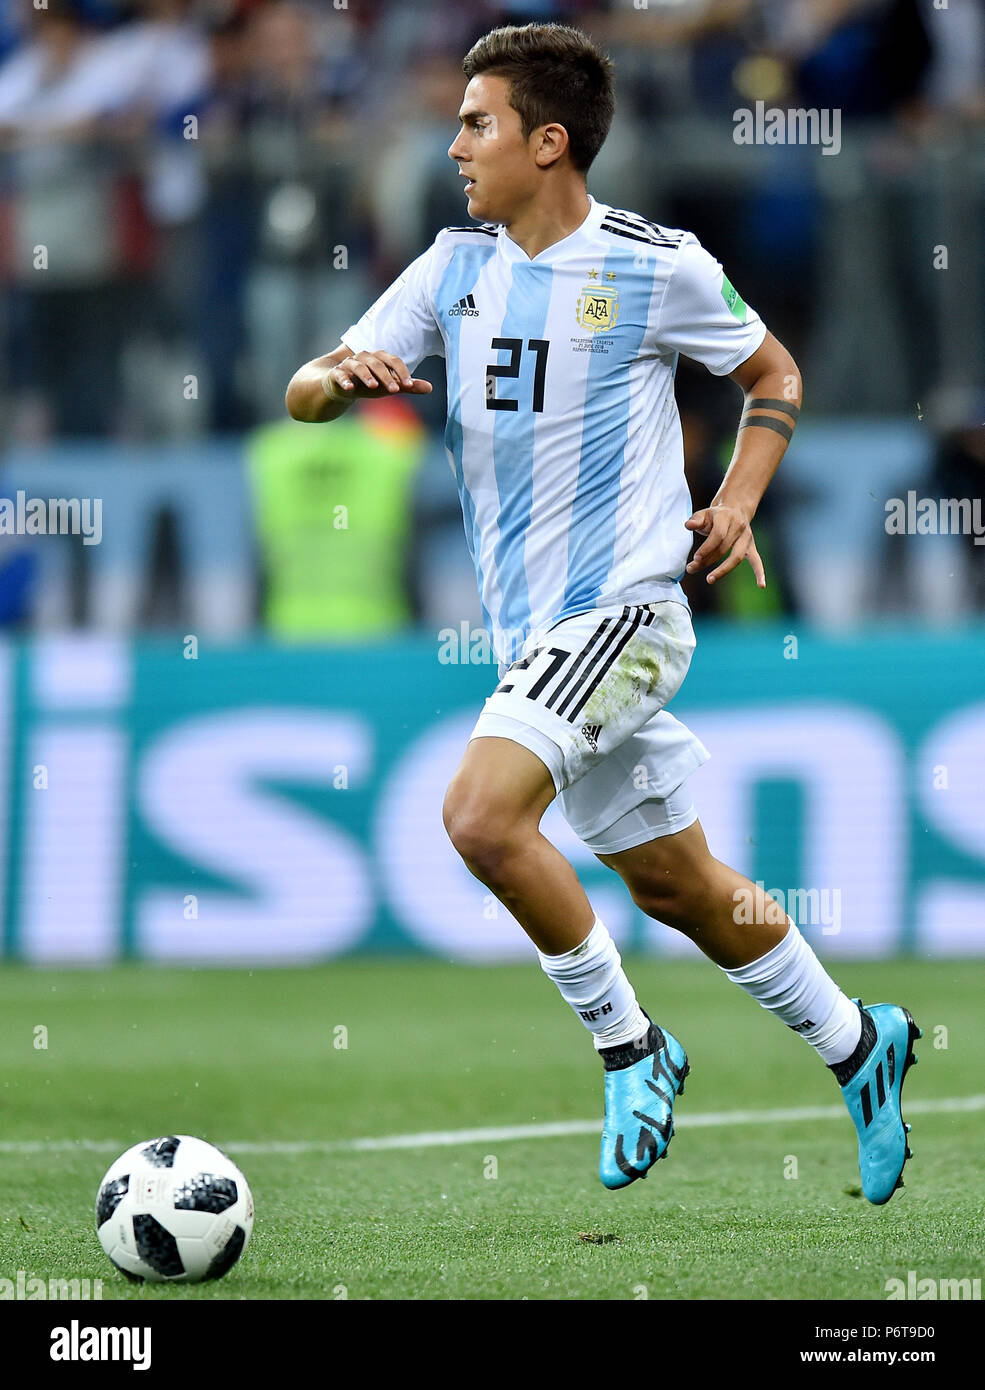 NIZHNIY NOVGOROD, RUSSIA - JUNE 21: Paulo Dybala of Argentina in action during the 2018 FIFA World Cup Russia group D match between Argentina and Croatia at Nizhniy Novgorod Stadium on June 21, 2018 in Nizhniy Novgorod, Russia. (Photo by Lukasz Laskowski/PressFocus/MB Media) Stock Photo